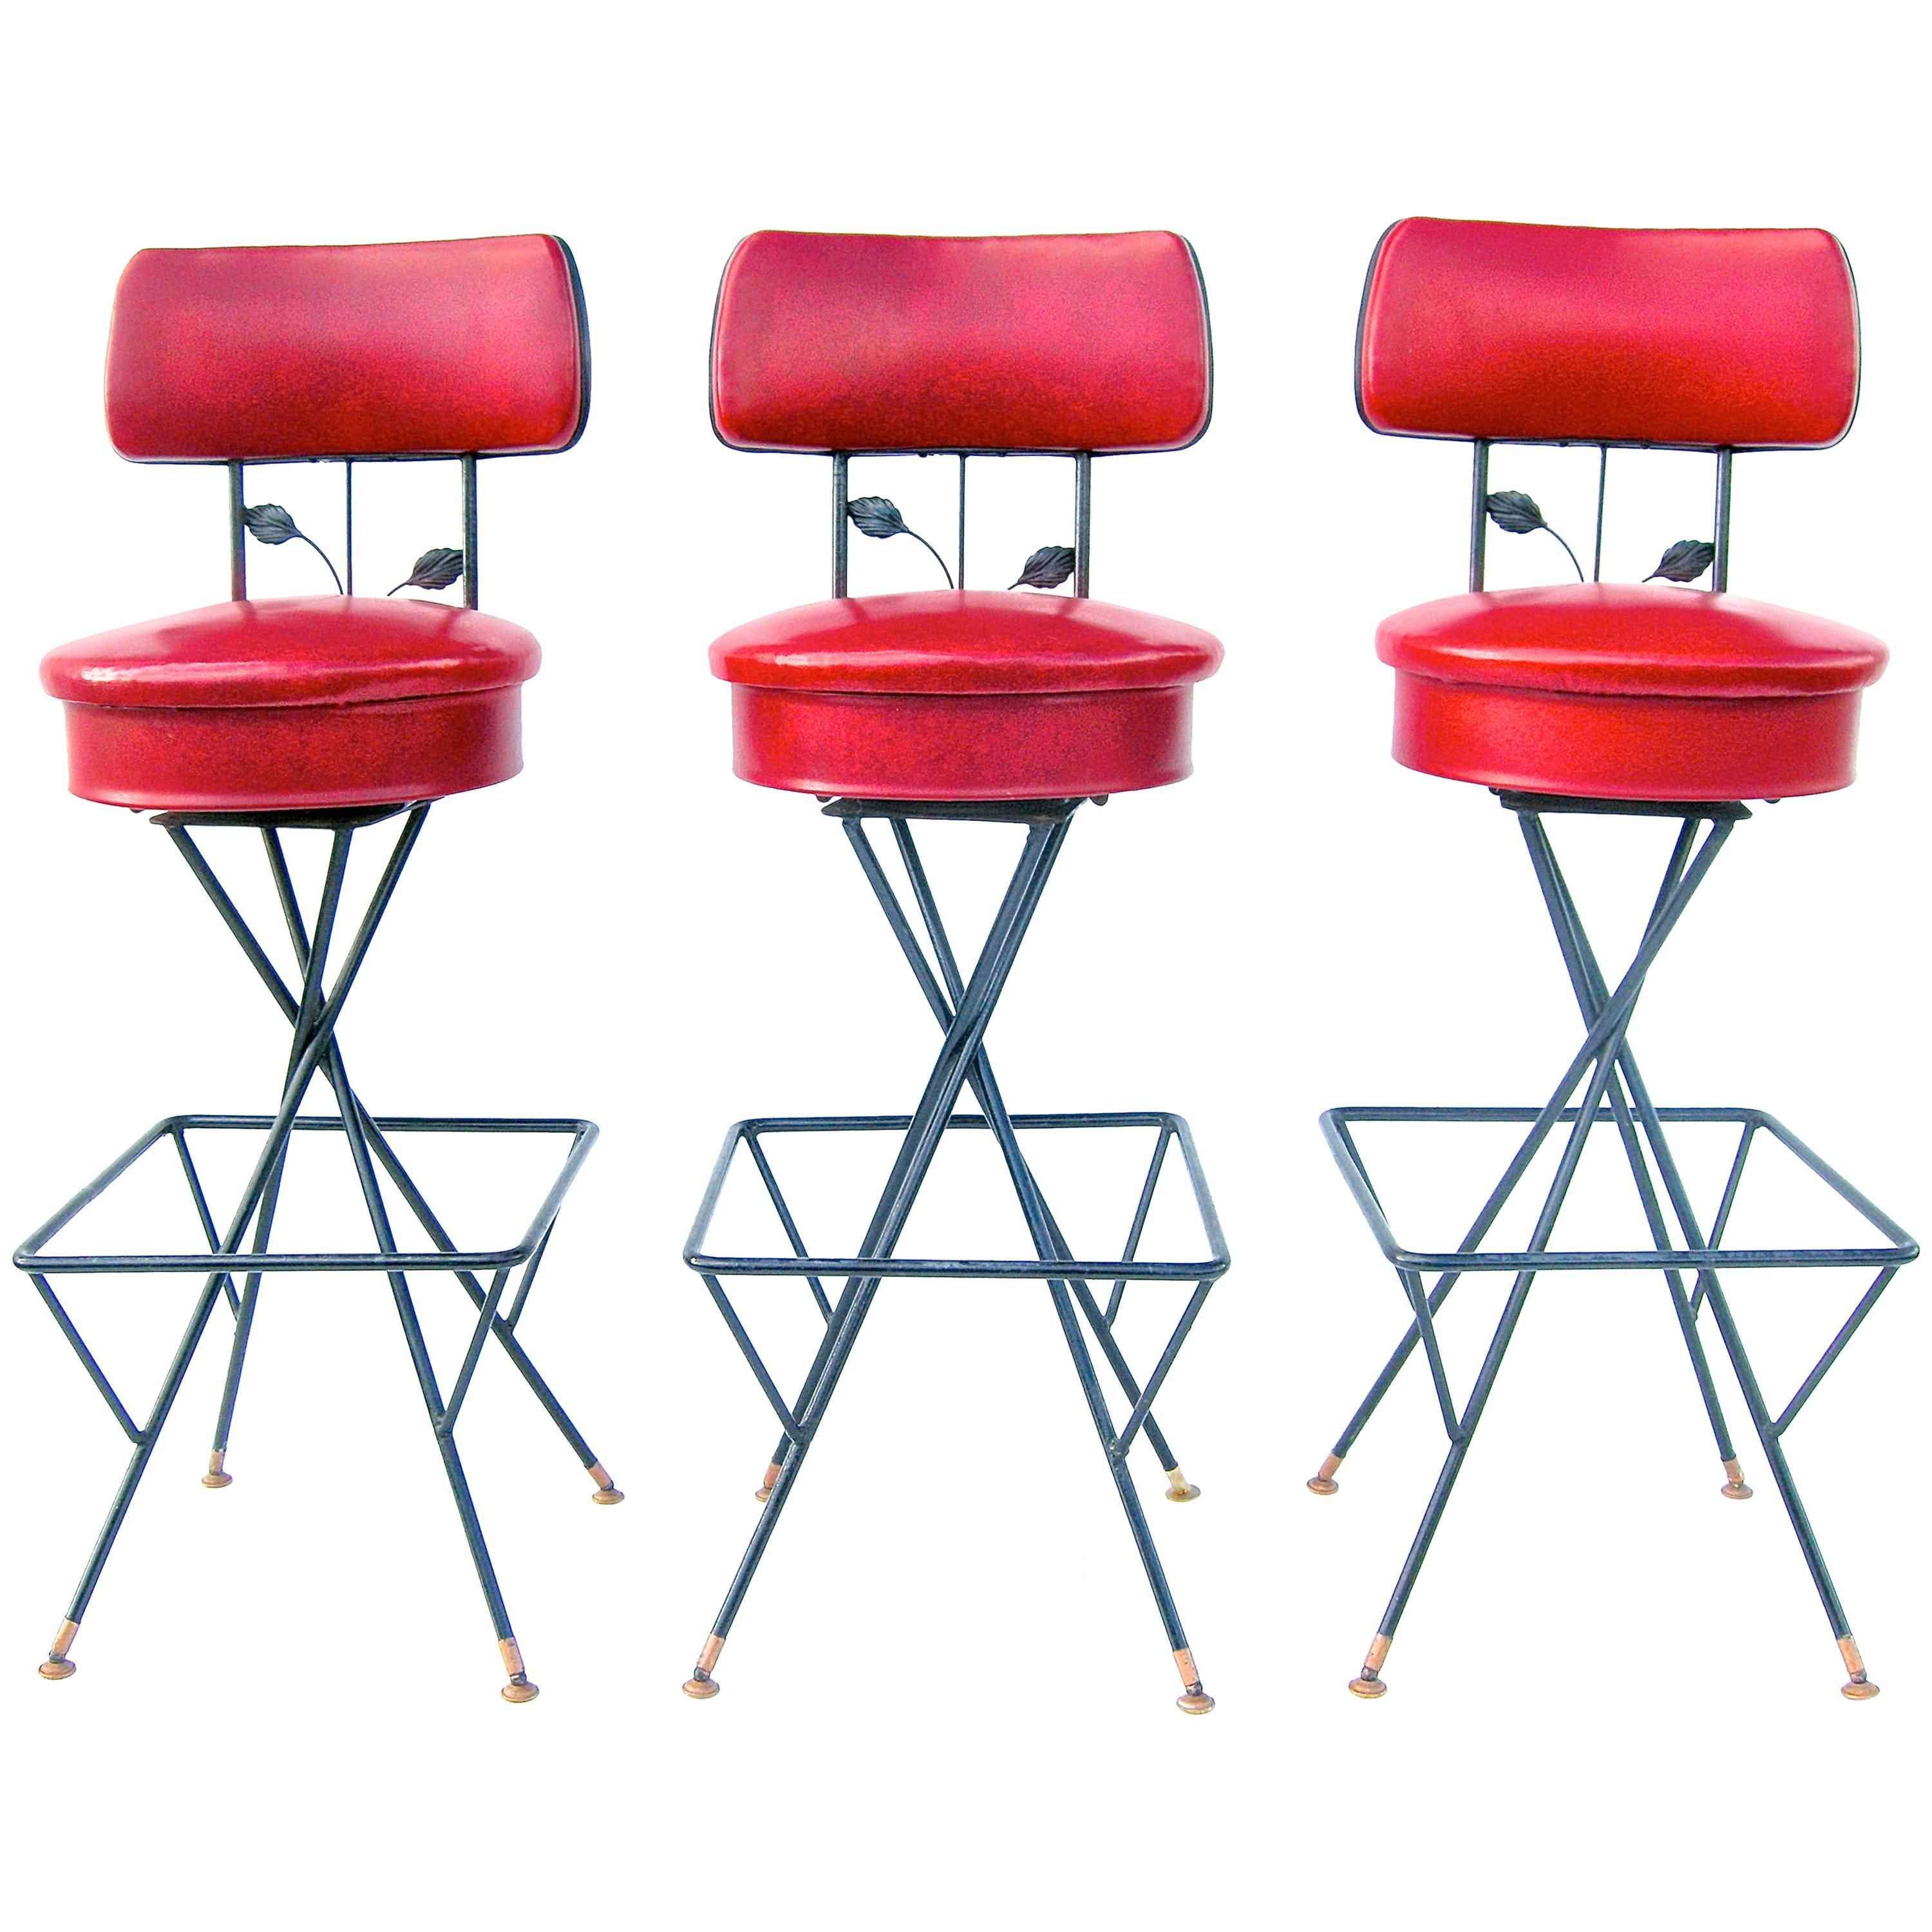 Trio of "Cherry-Licious" Bar Stools For Sale